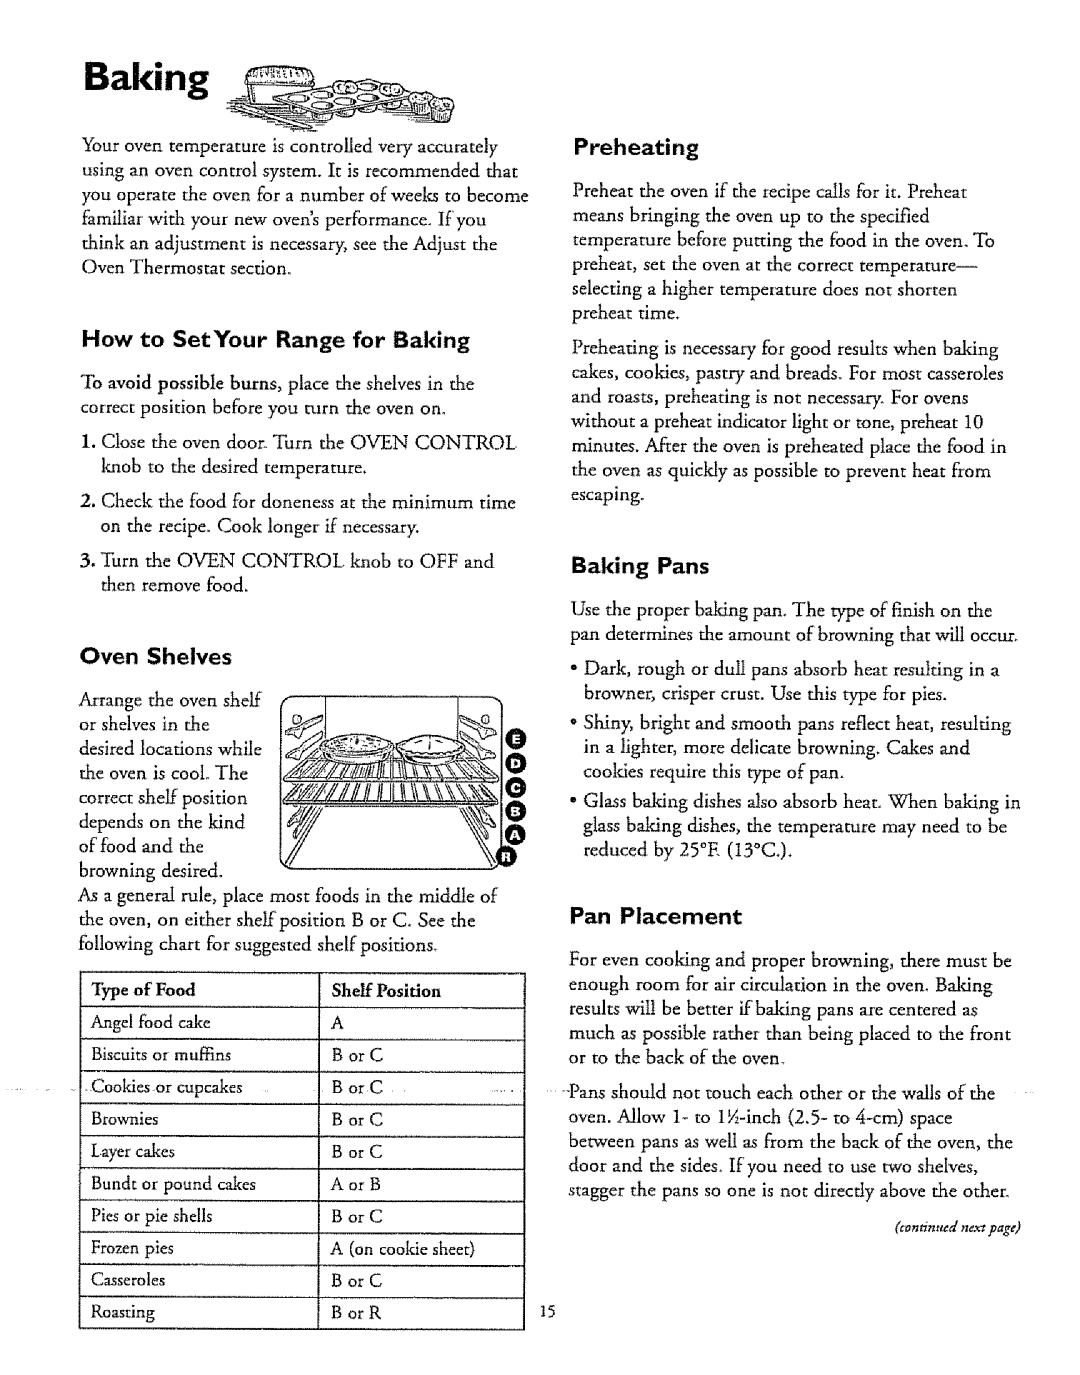 Sears 71751, 71068, 71351, 71168 How to SetYour Range for Baking, Preheating, Baking Pans, Oven Shelves, Pan Placement 